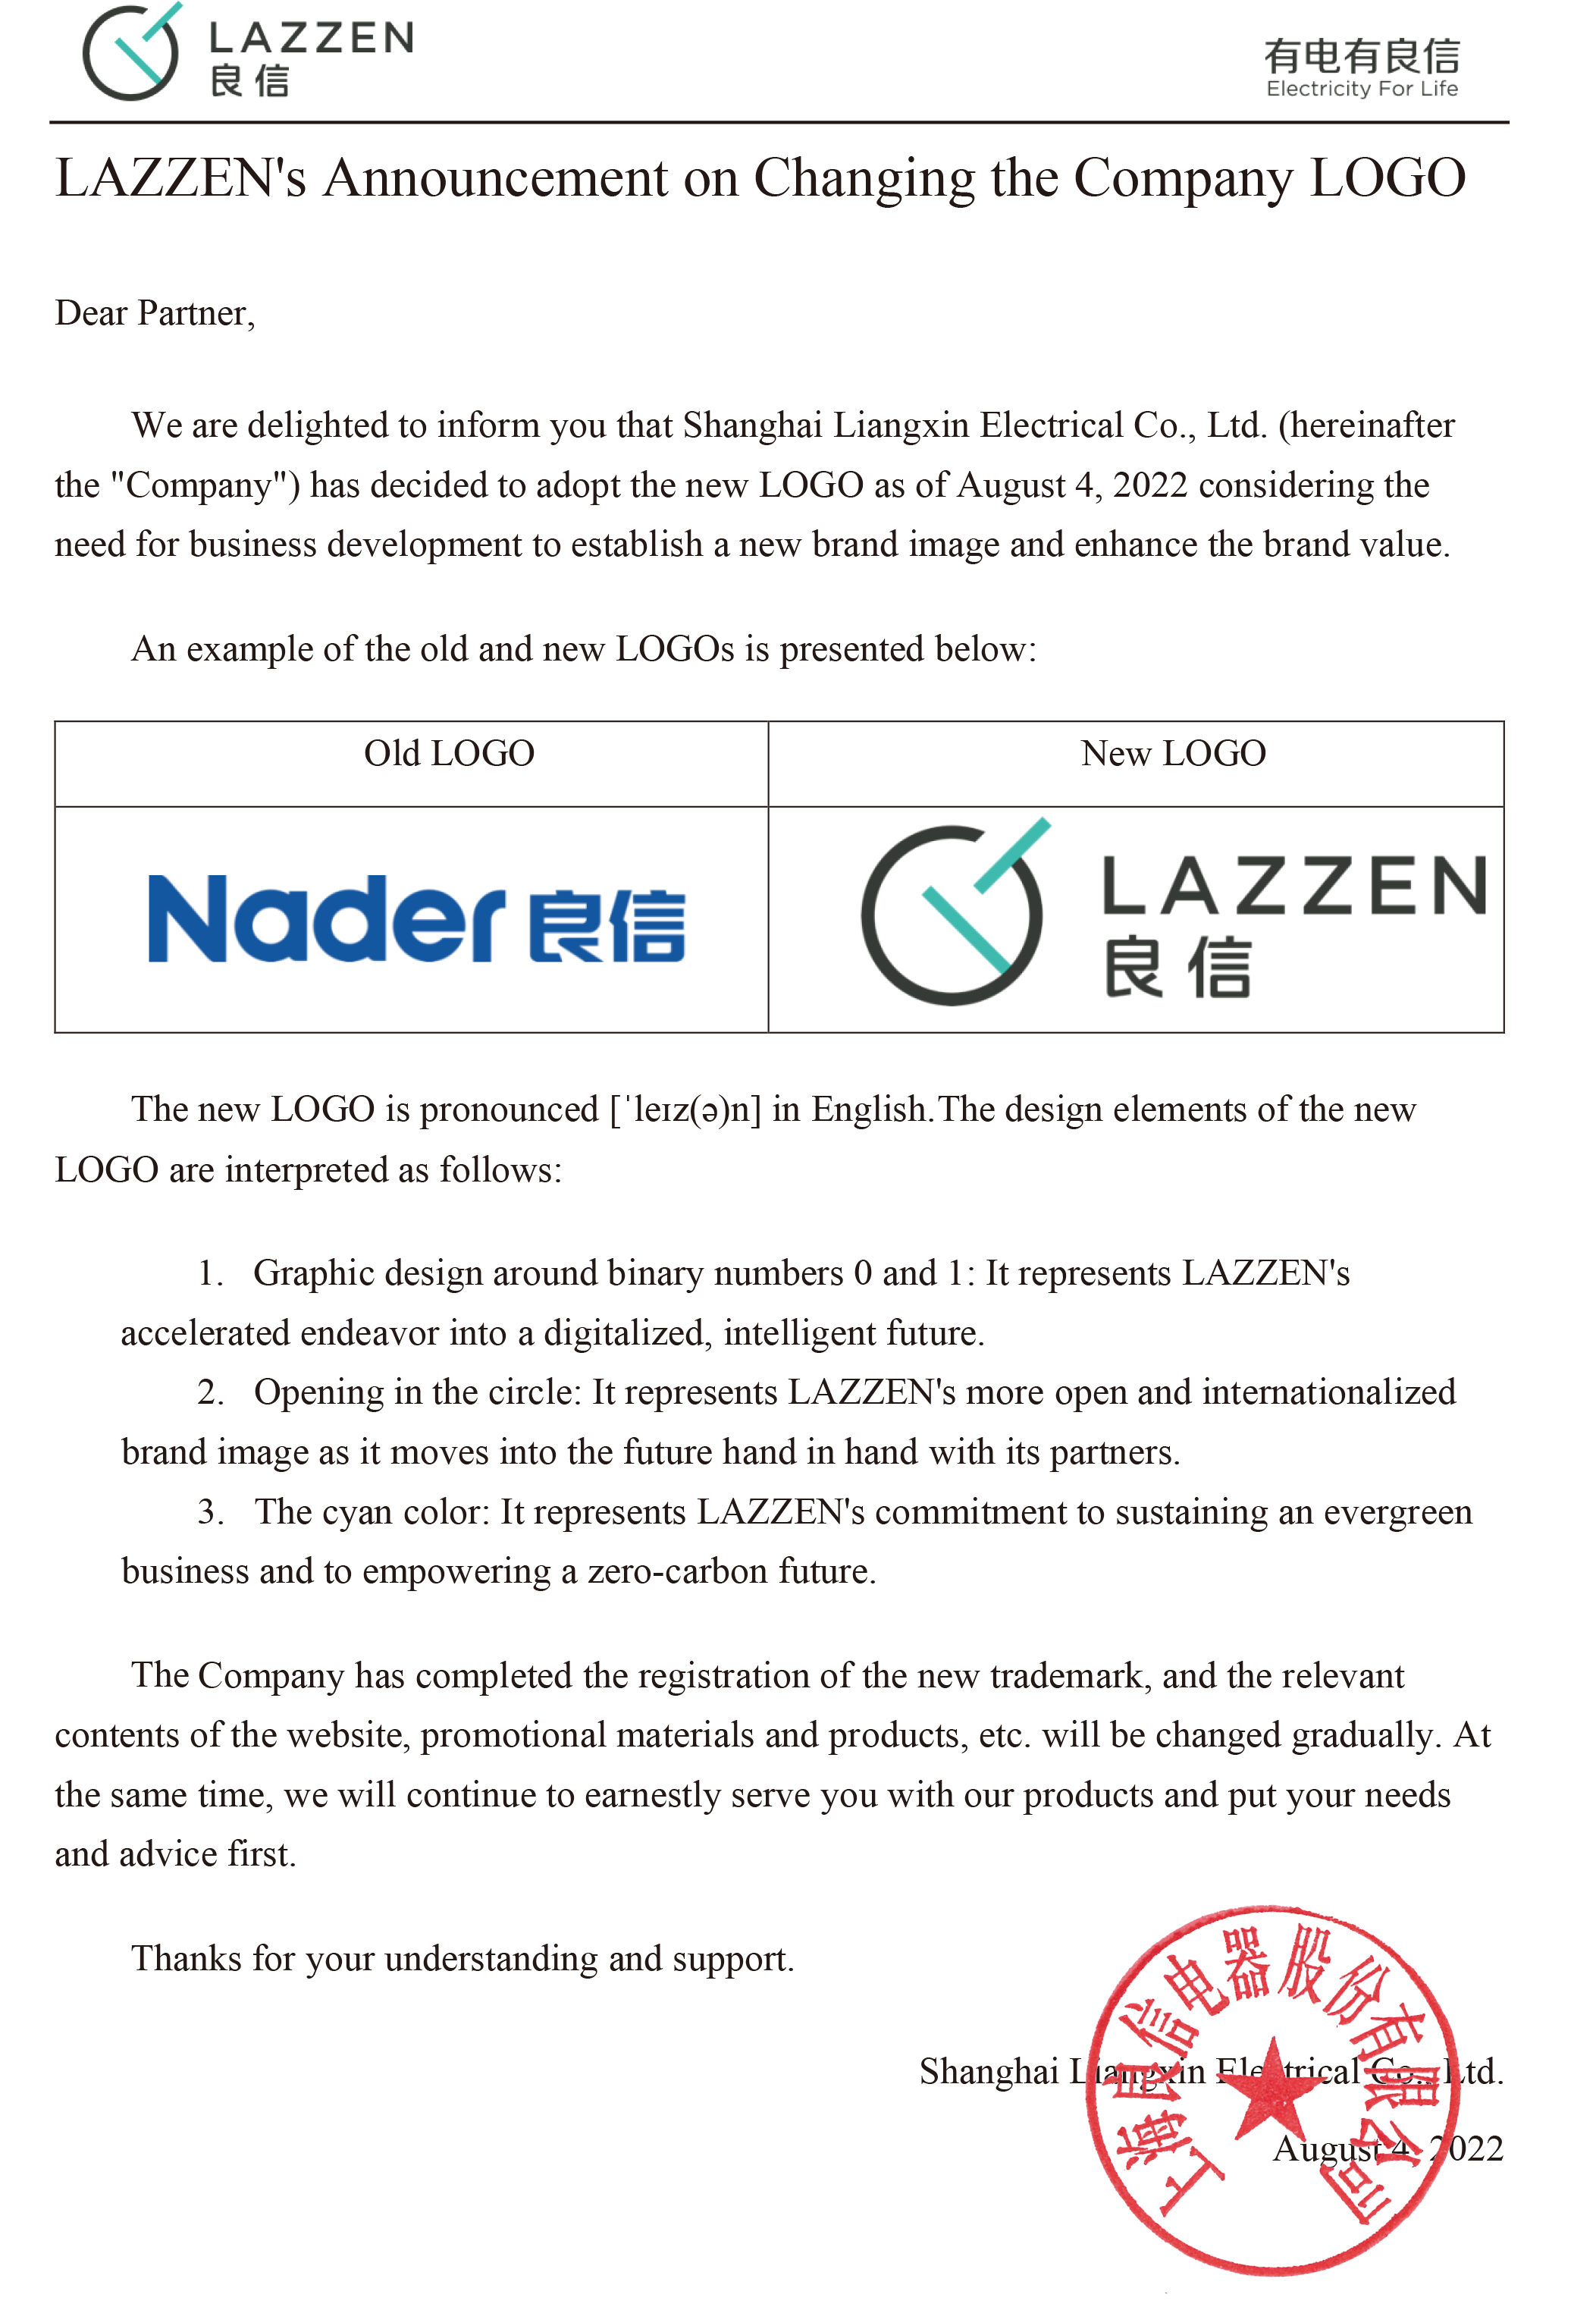 LAZZEN's Announcement on Changing the Company LOGO(1).jpg